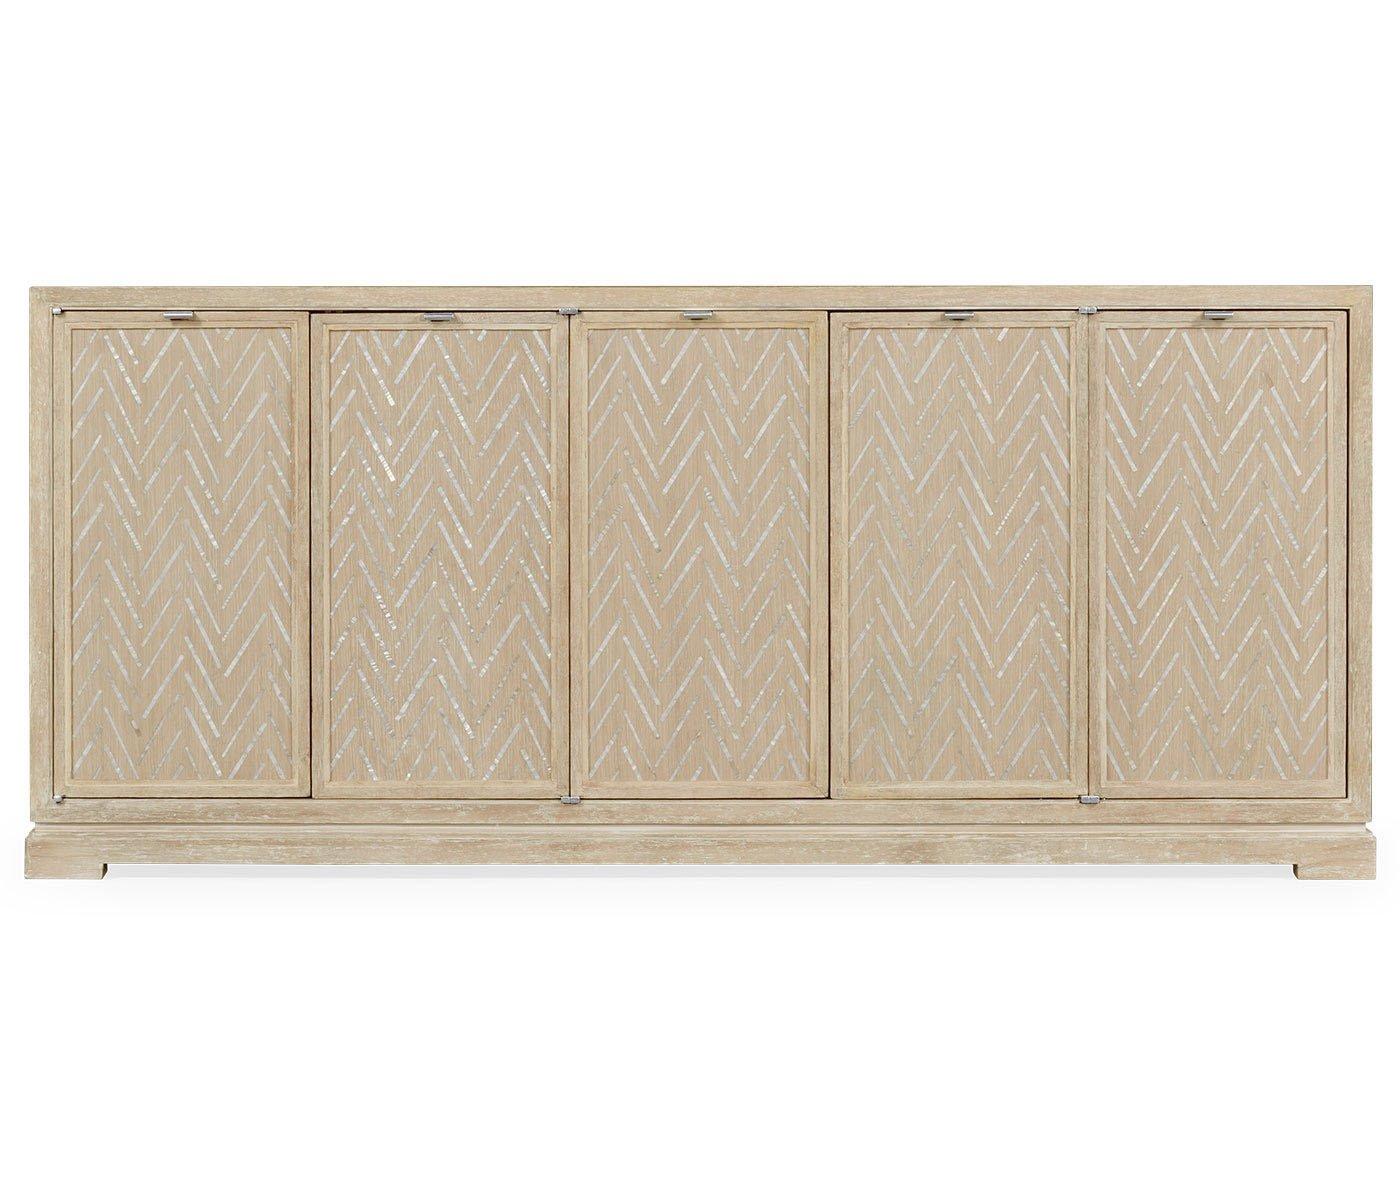 A unique modern whitewashed credenza with reversible front panels for different motifs. Beautifully inlaid mother of pearl Classic herringbone fronts, or custom hand printed Julian paisley, or any possible combination which makes 